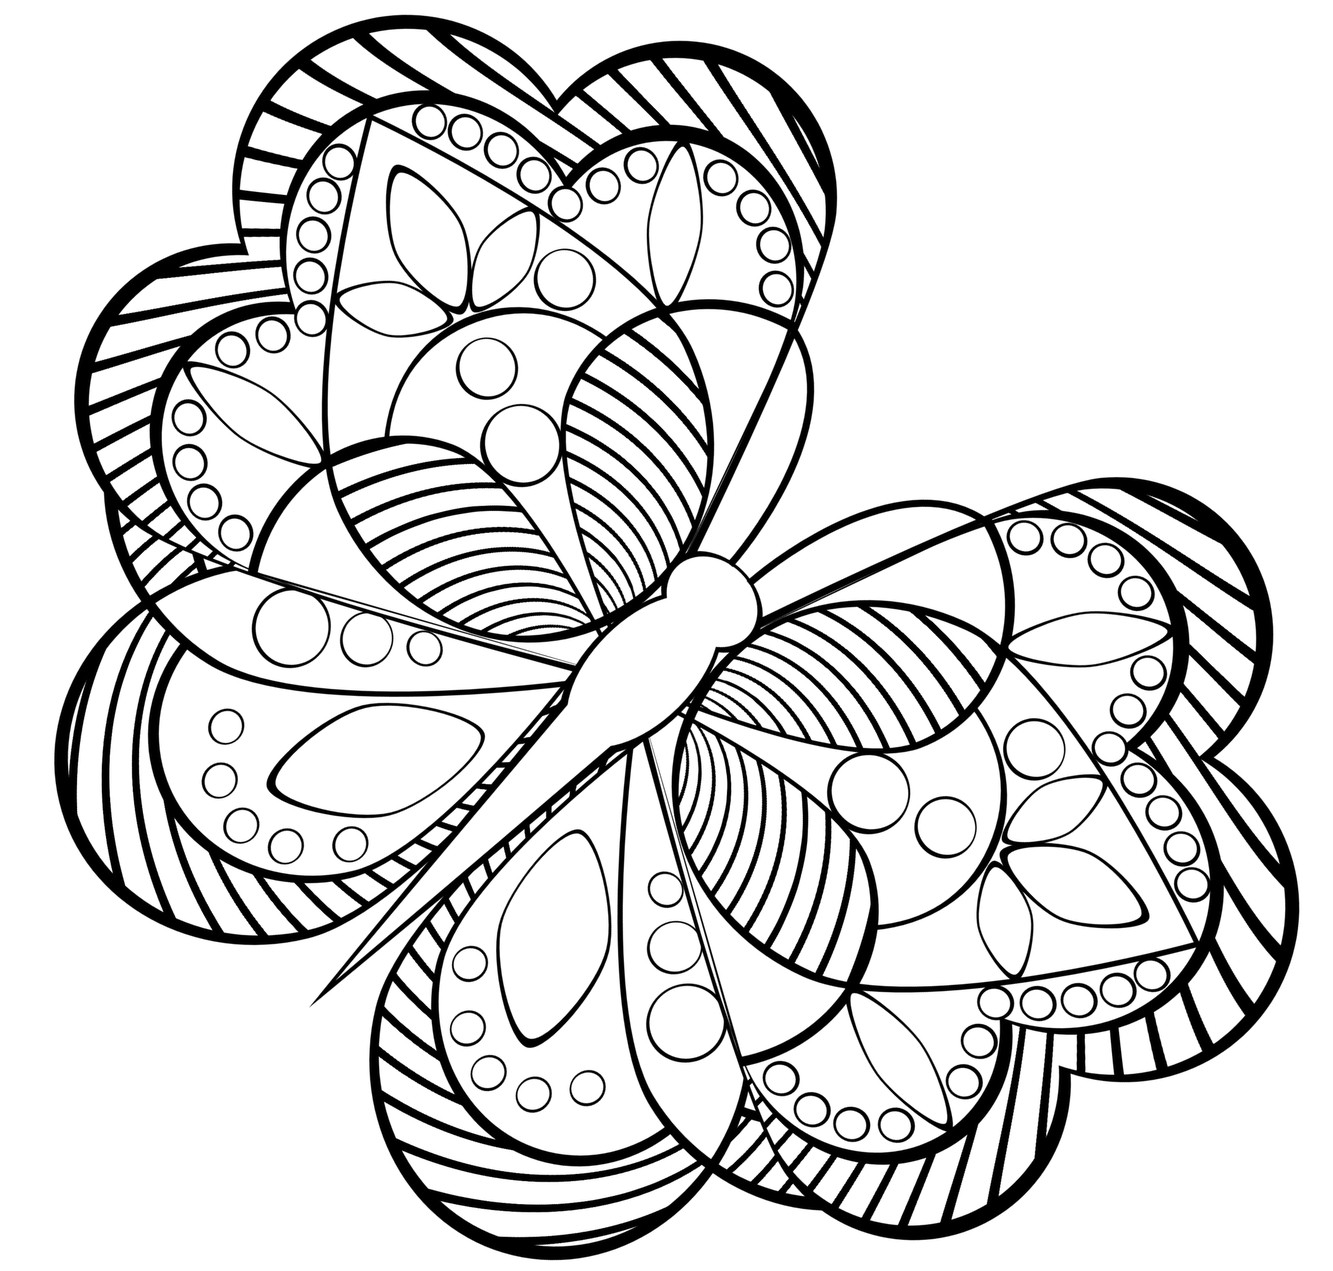 Printable Coloring Pages For Elderly
 Free Coloring Pages For Adults To Print Special Image 12